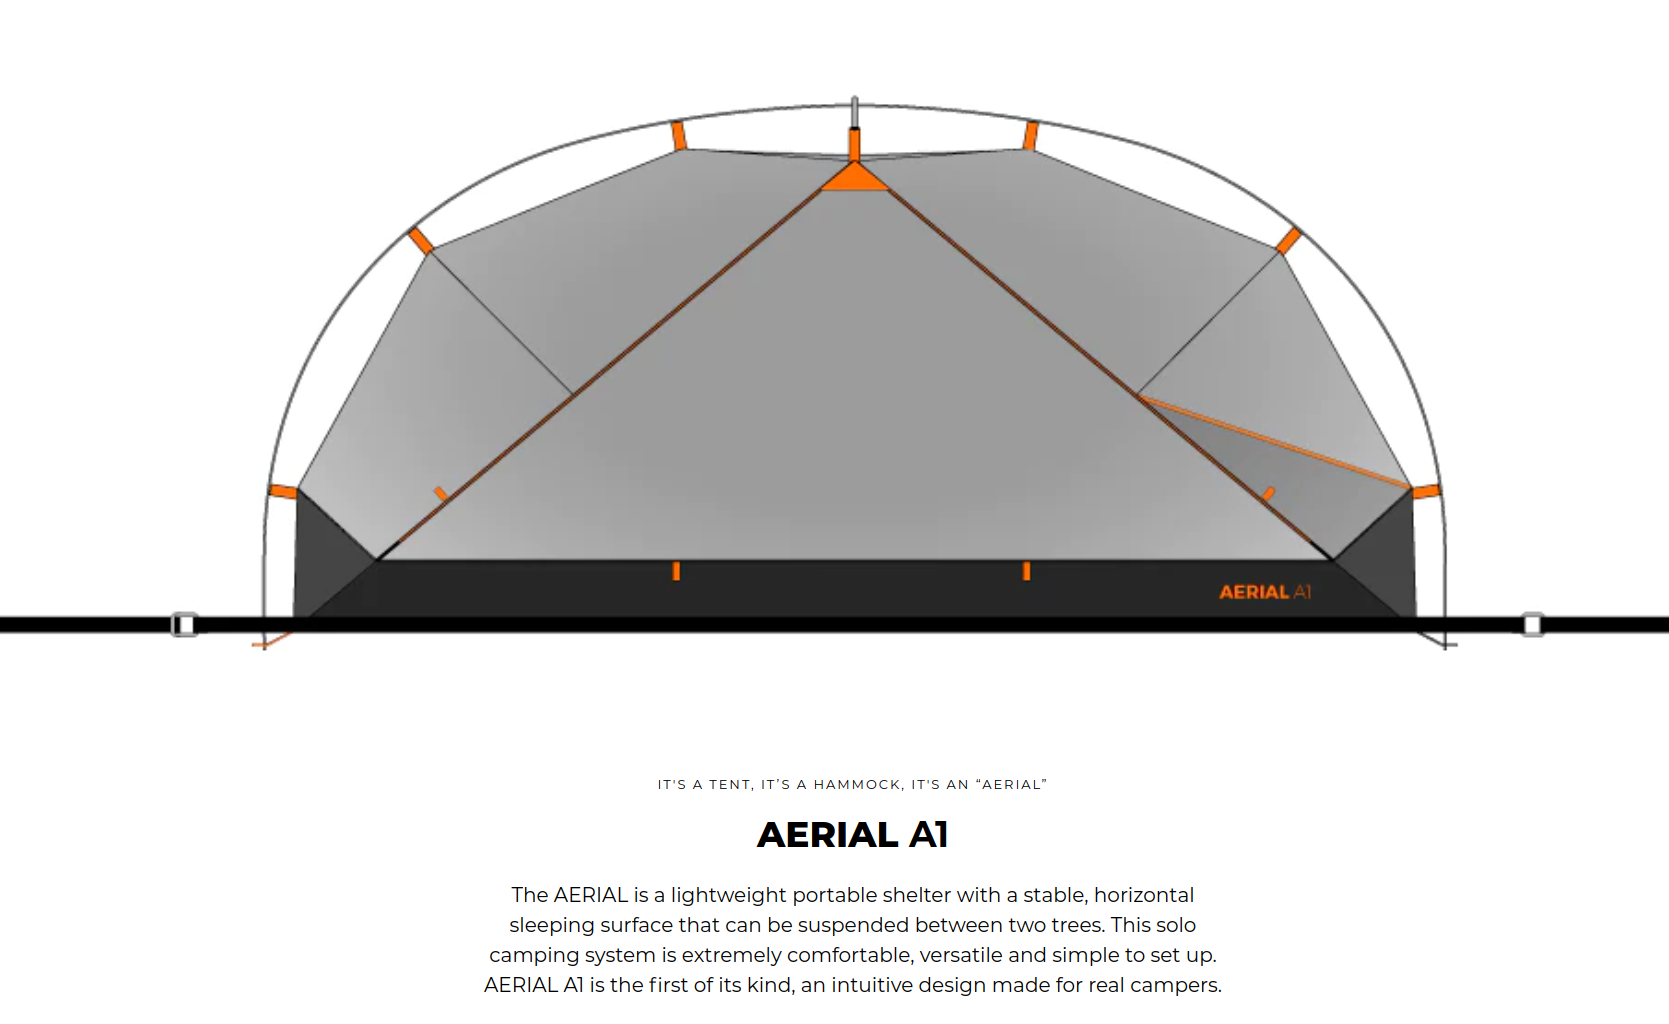 The AERIAL A1 Tree Tent - It's a tent, It's a hammock, It's an "AERIAL"